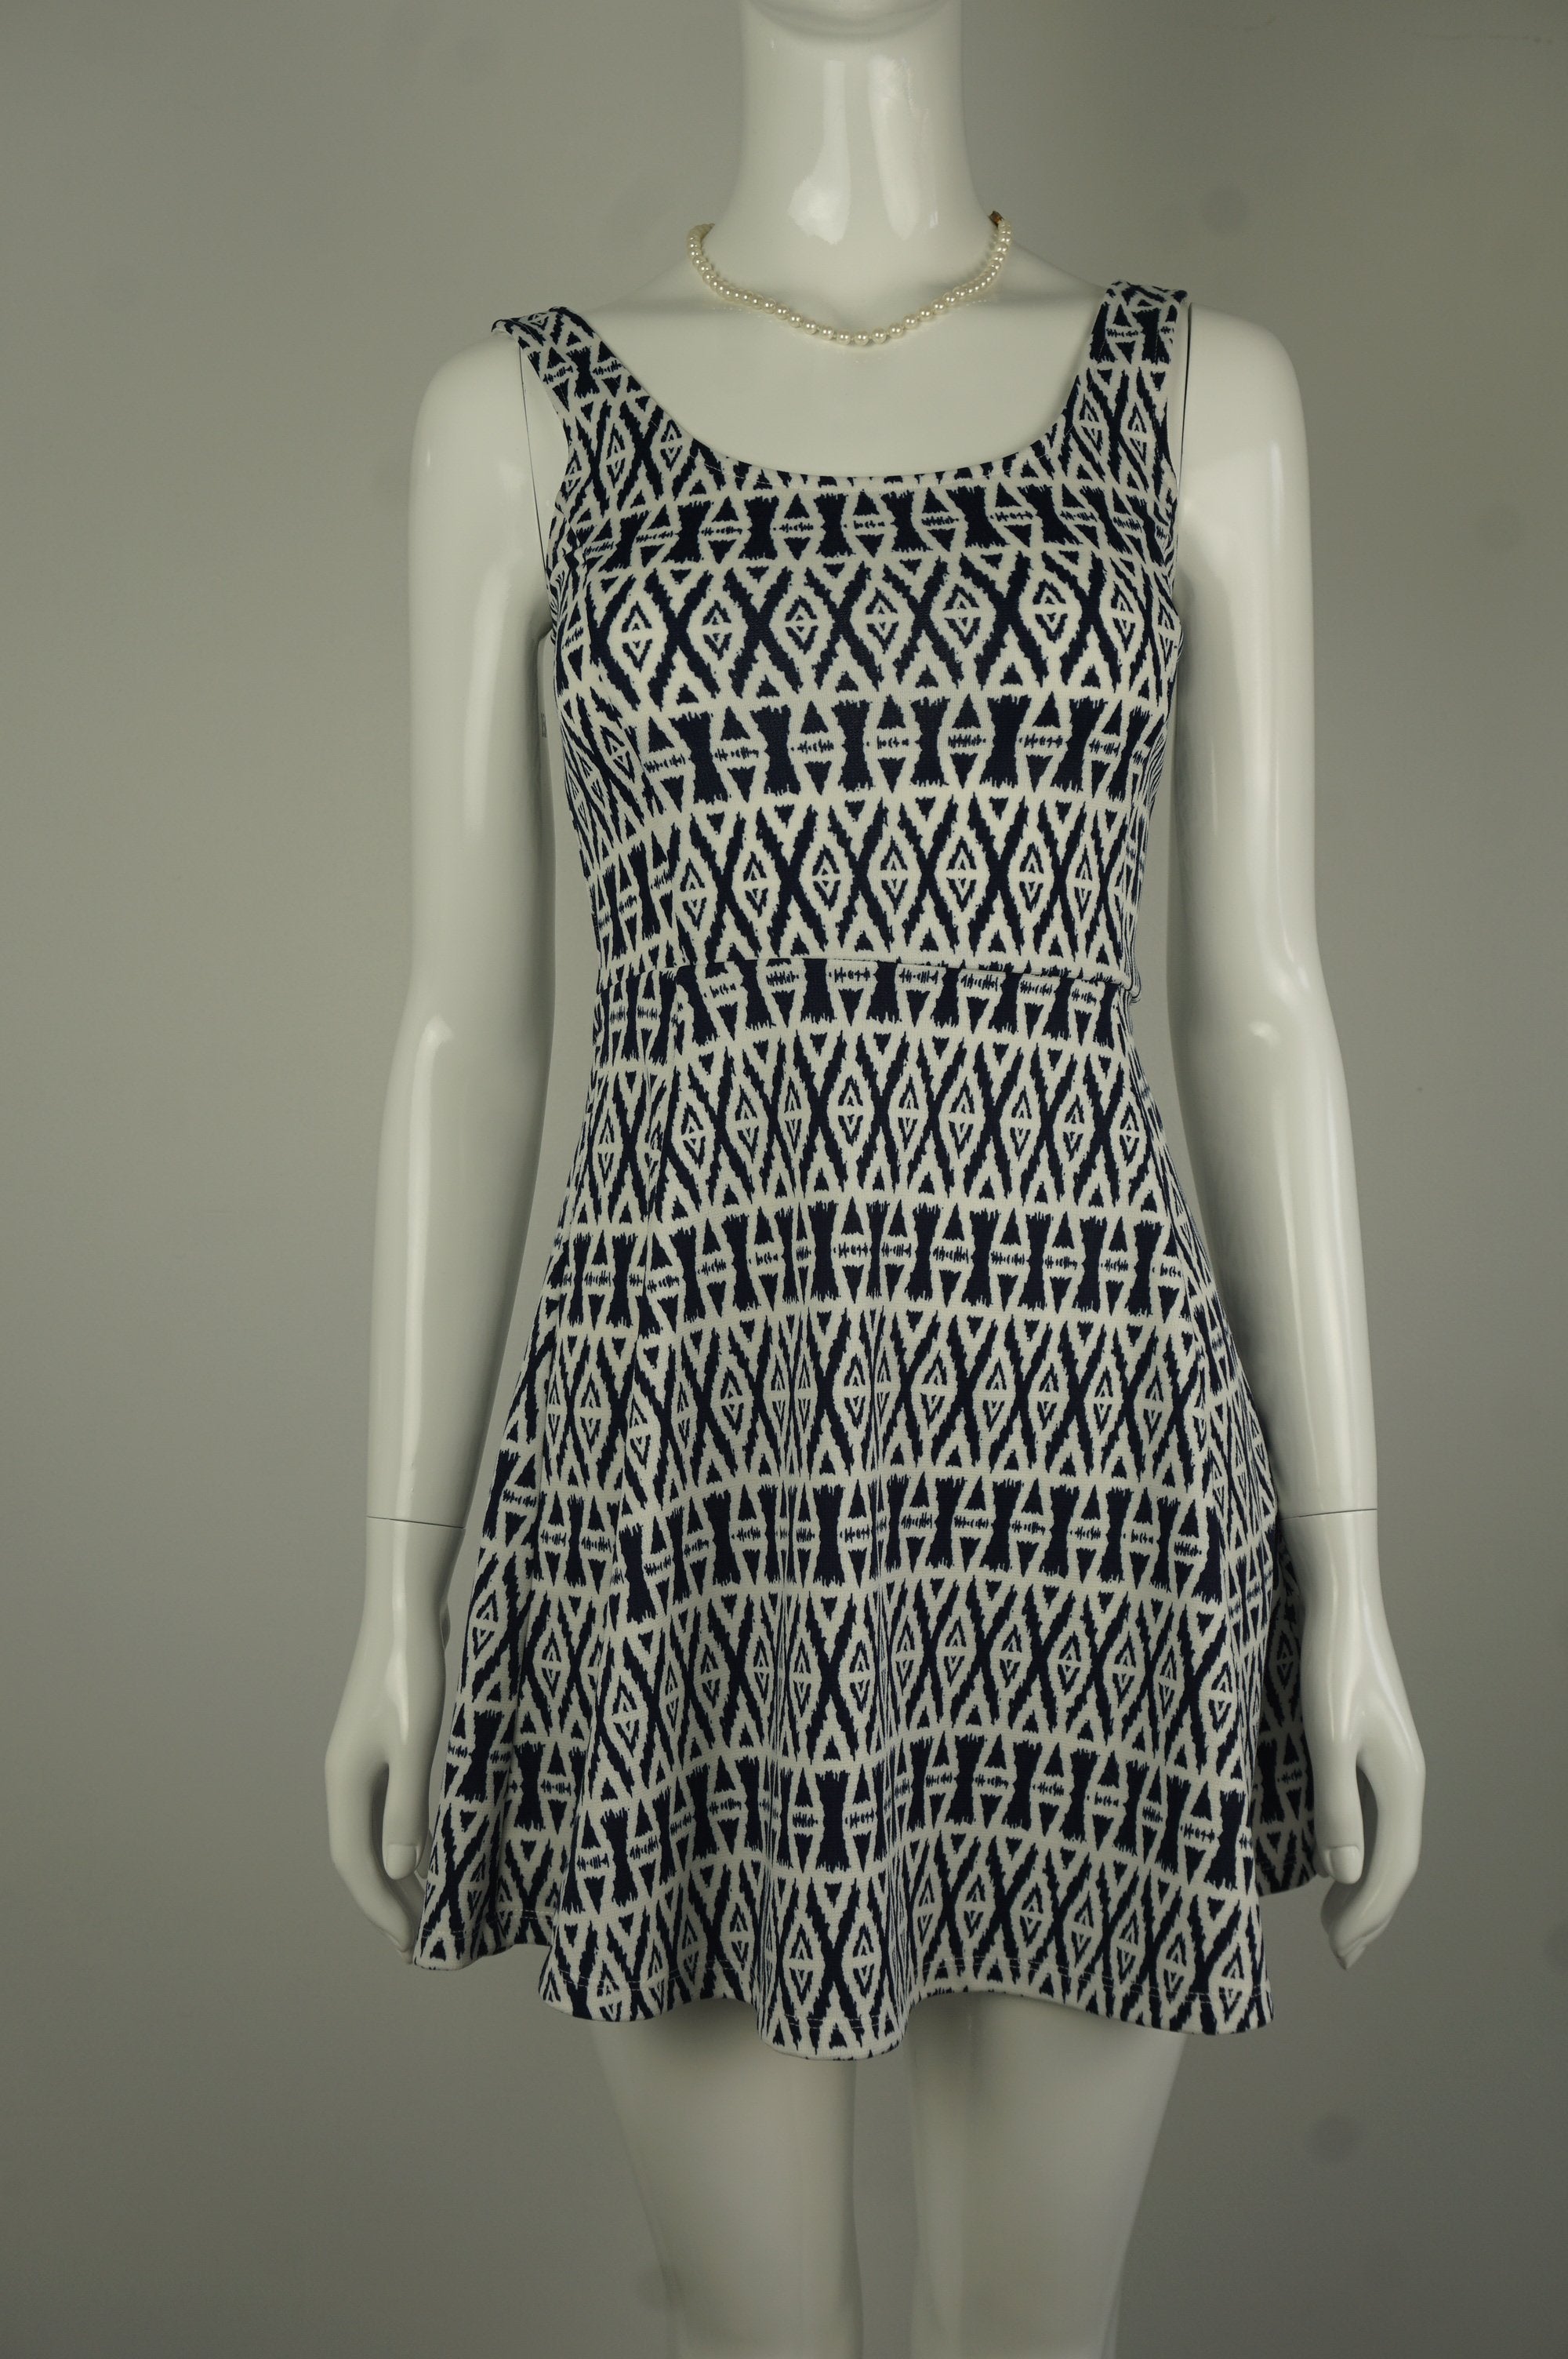 H&M Navy Blue and White Patterned Fit and Flare Mini Dress  , You just RSVP'd to that BBQ party on the beach and are looking for a cute dress to impress? We think this simple short fit and flare dress with squared neck is perfect for you!, Blue, White, 2 way stretch fabric, women's Dresses & Rompers, women's Blue, White Dresses & Rompers, H&M women's Dresses & Rompers, Fit and flare mini dress, fit and flare short dress with squared neck, dorotea square neck fit and flare dress